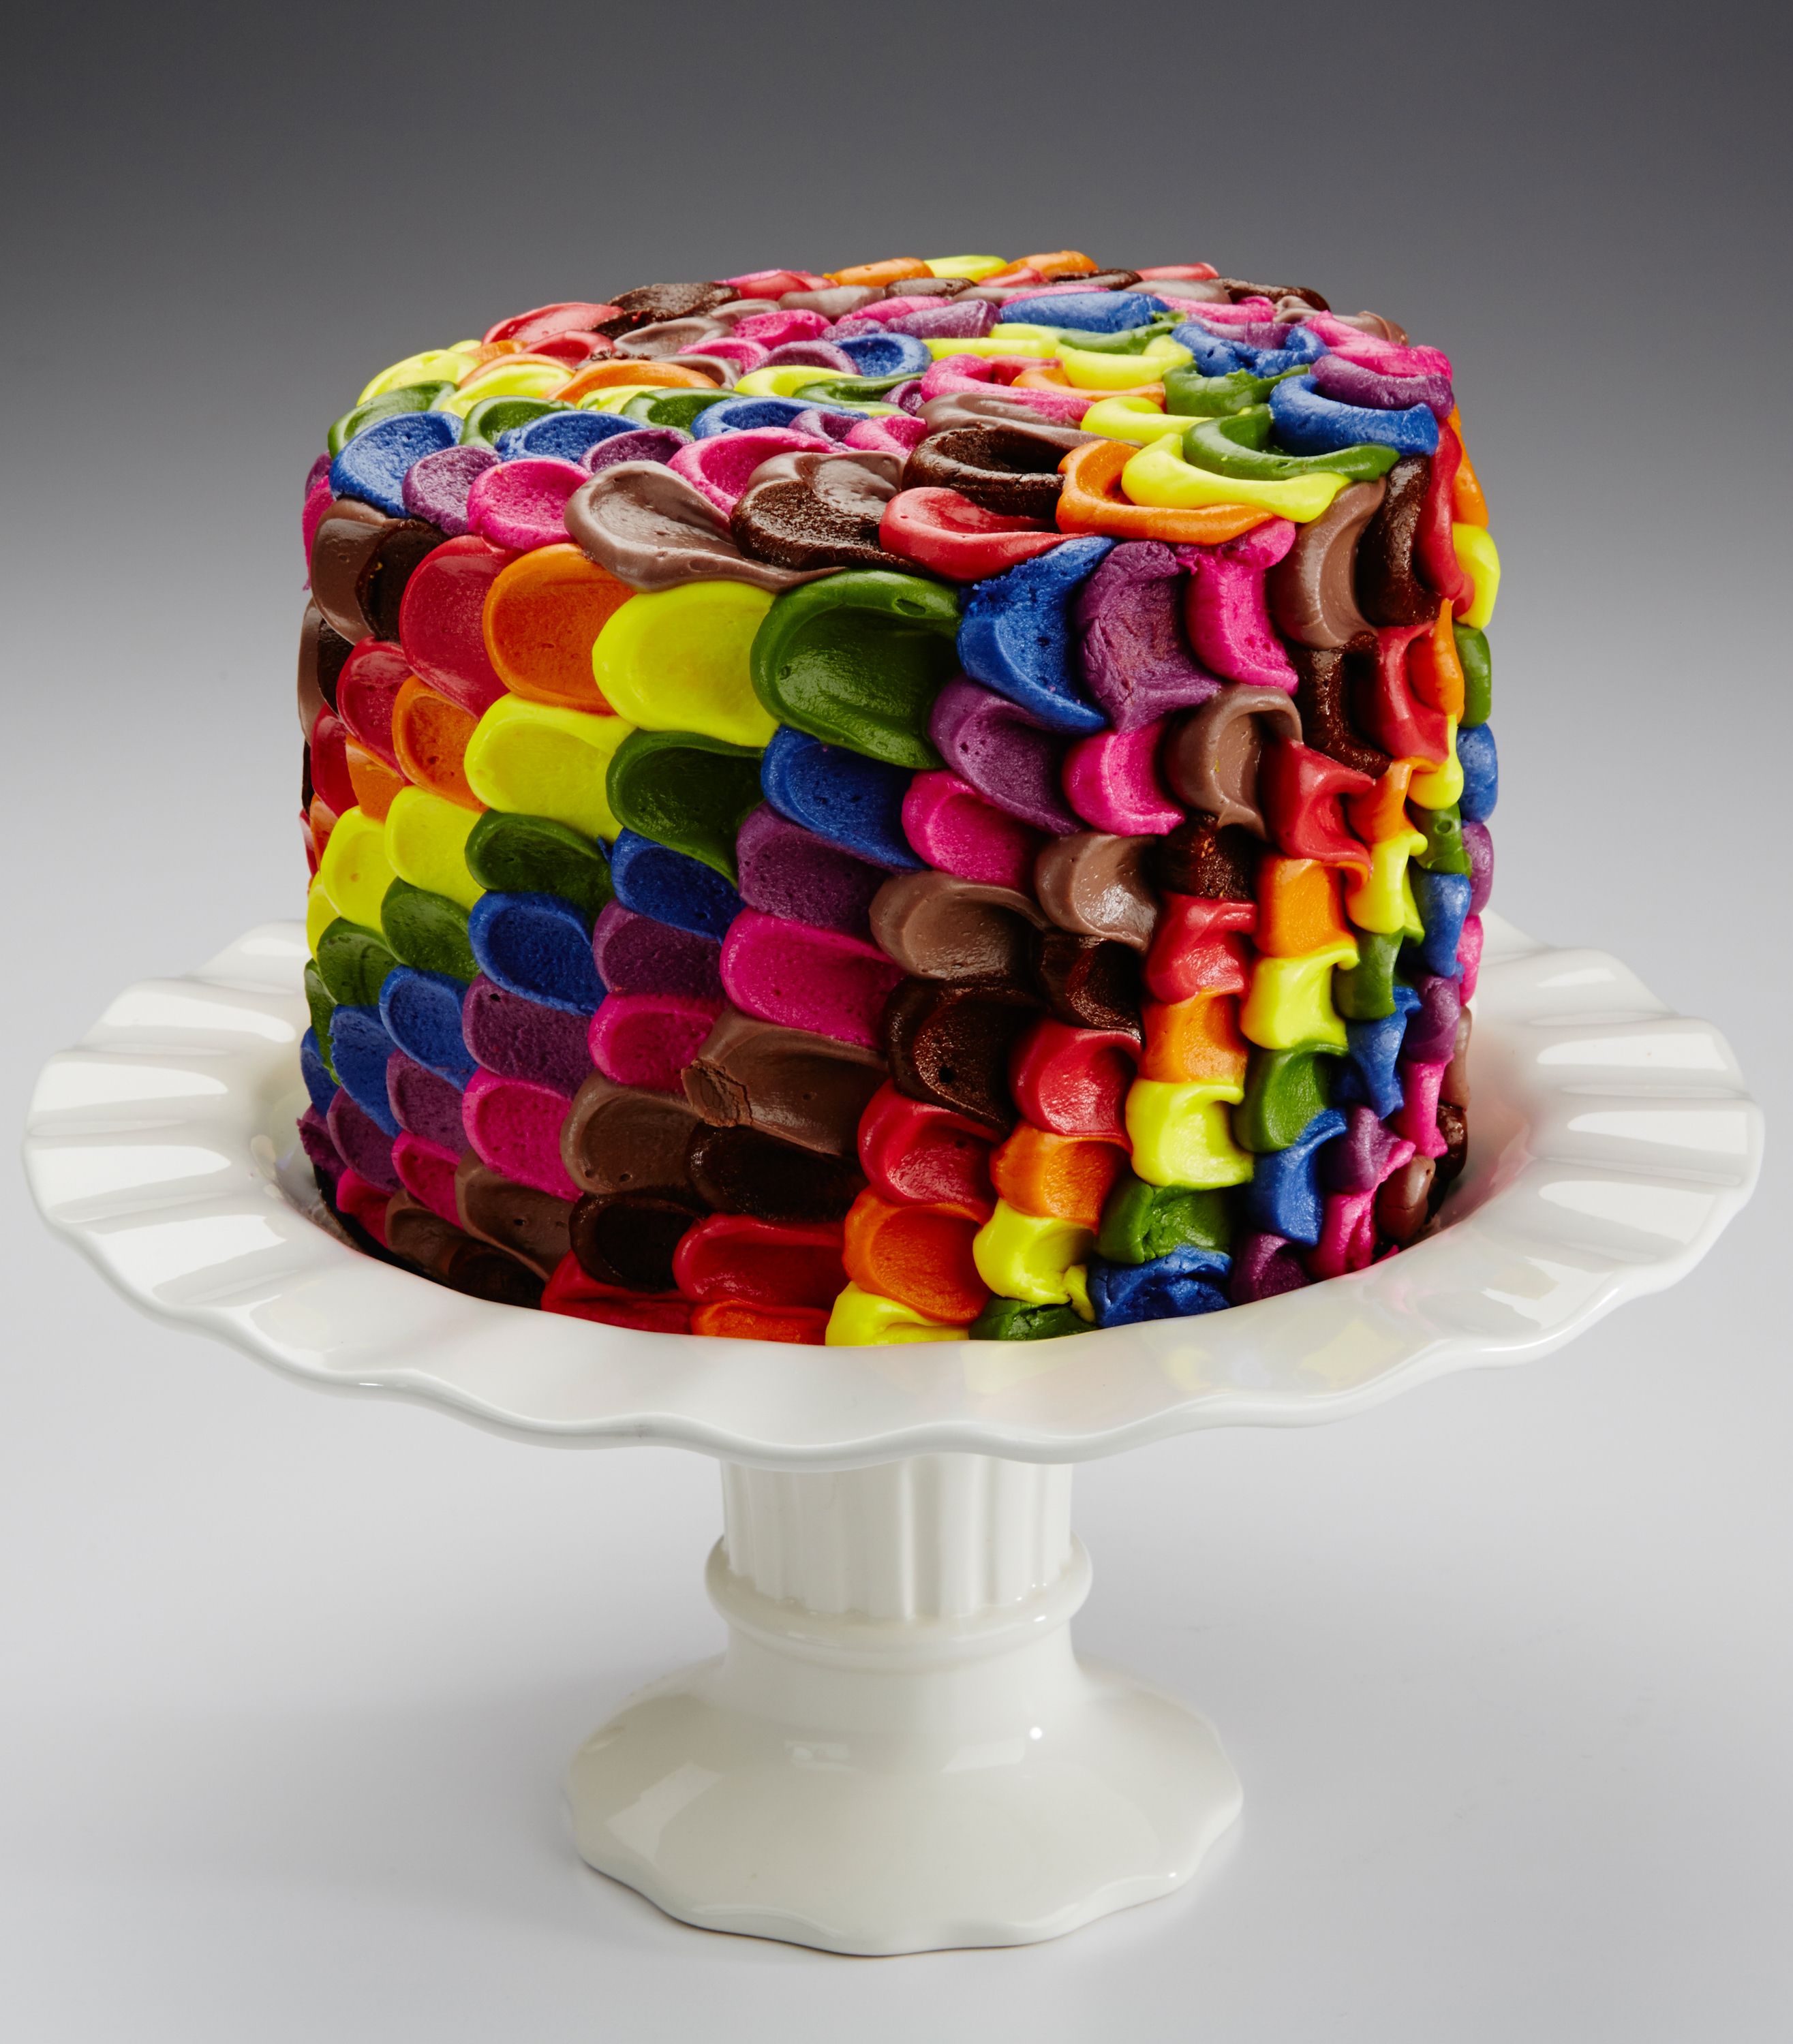 This multi-colored cake's icing is made from red cabbage juice, turmeric, annatto, beet juice, and caramel color.